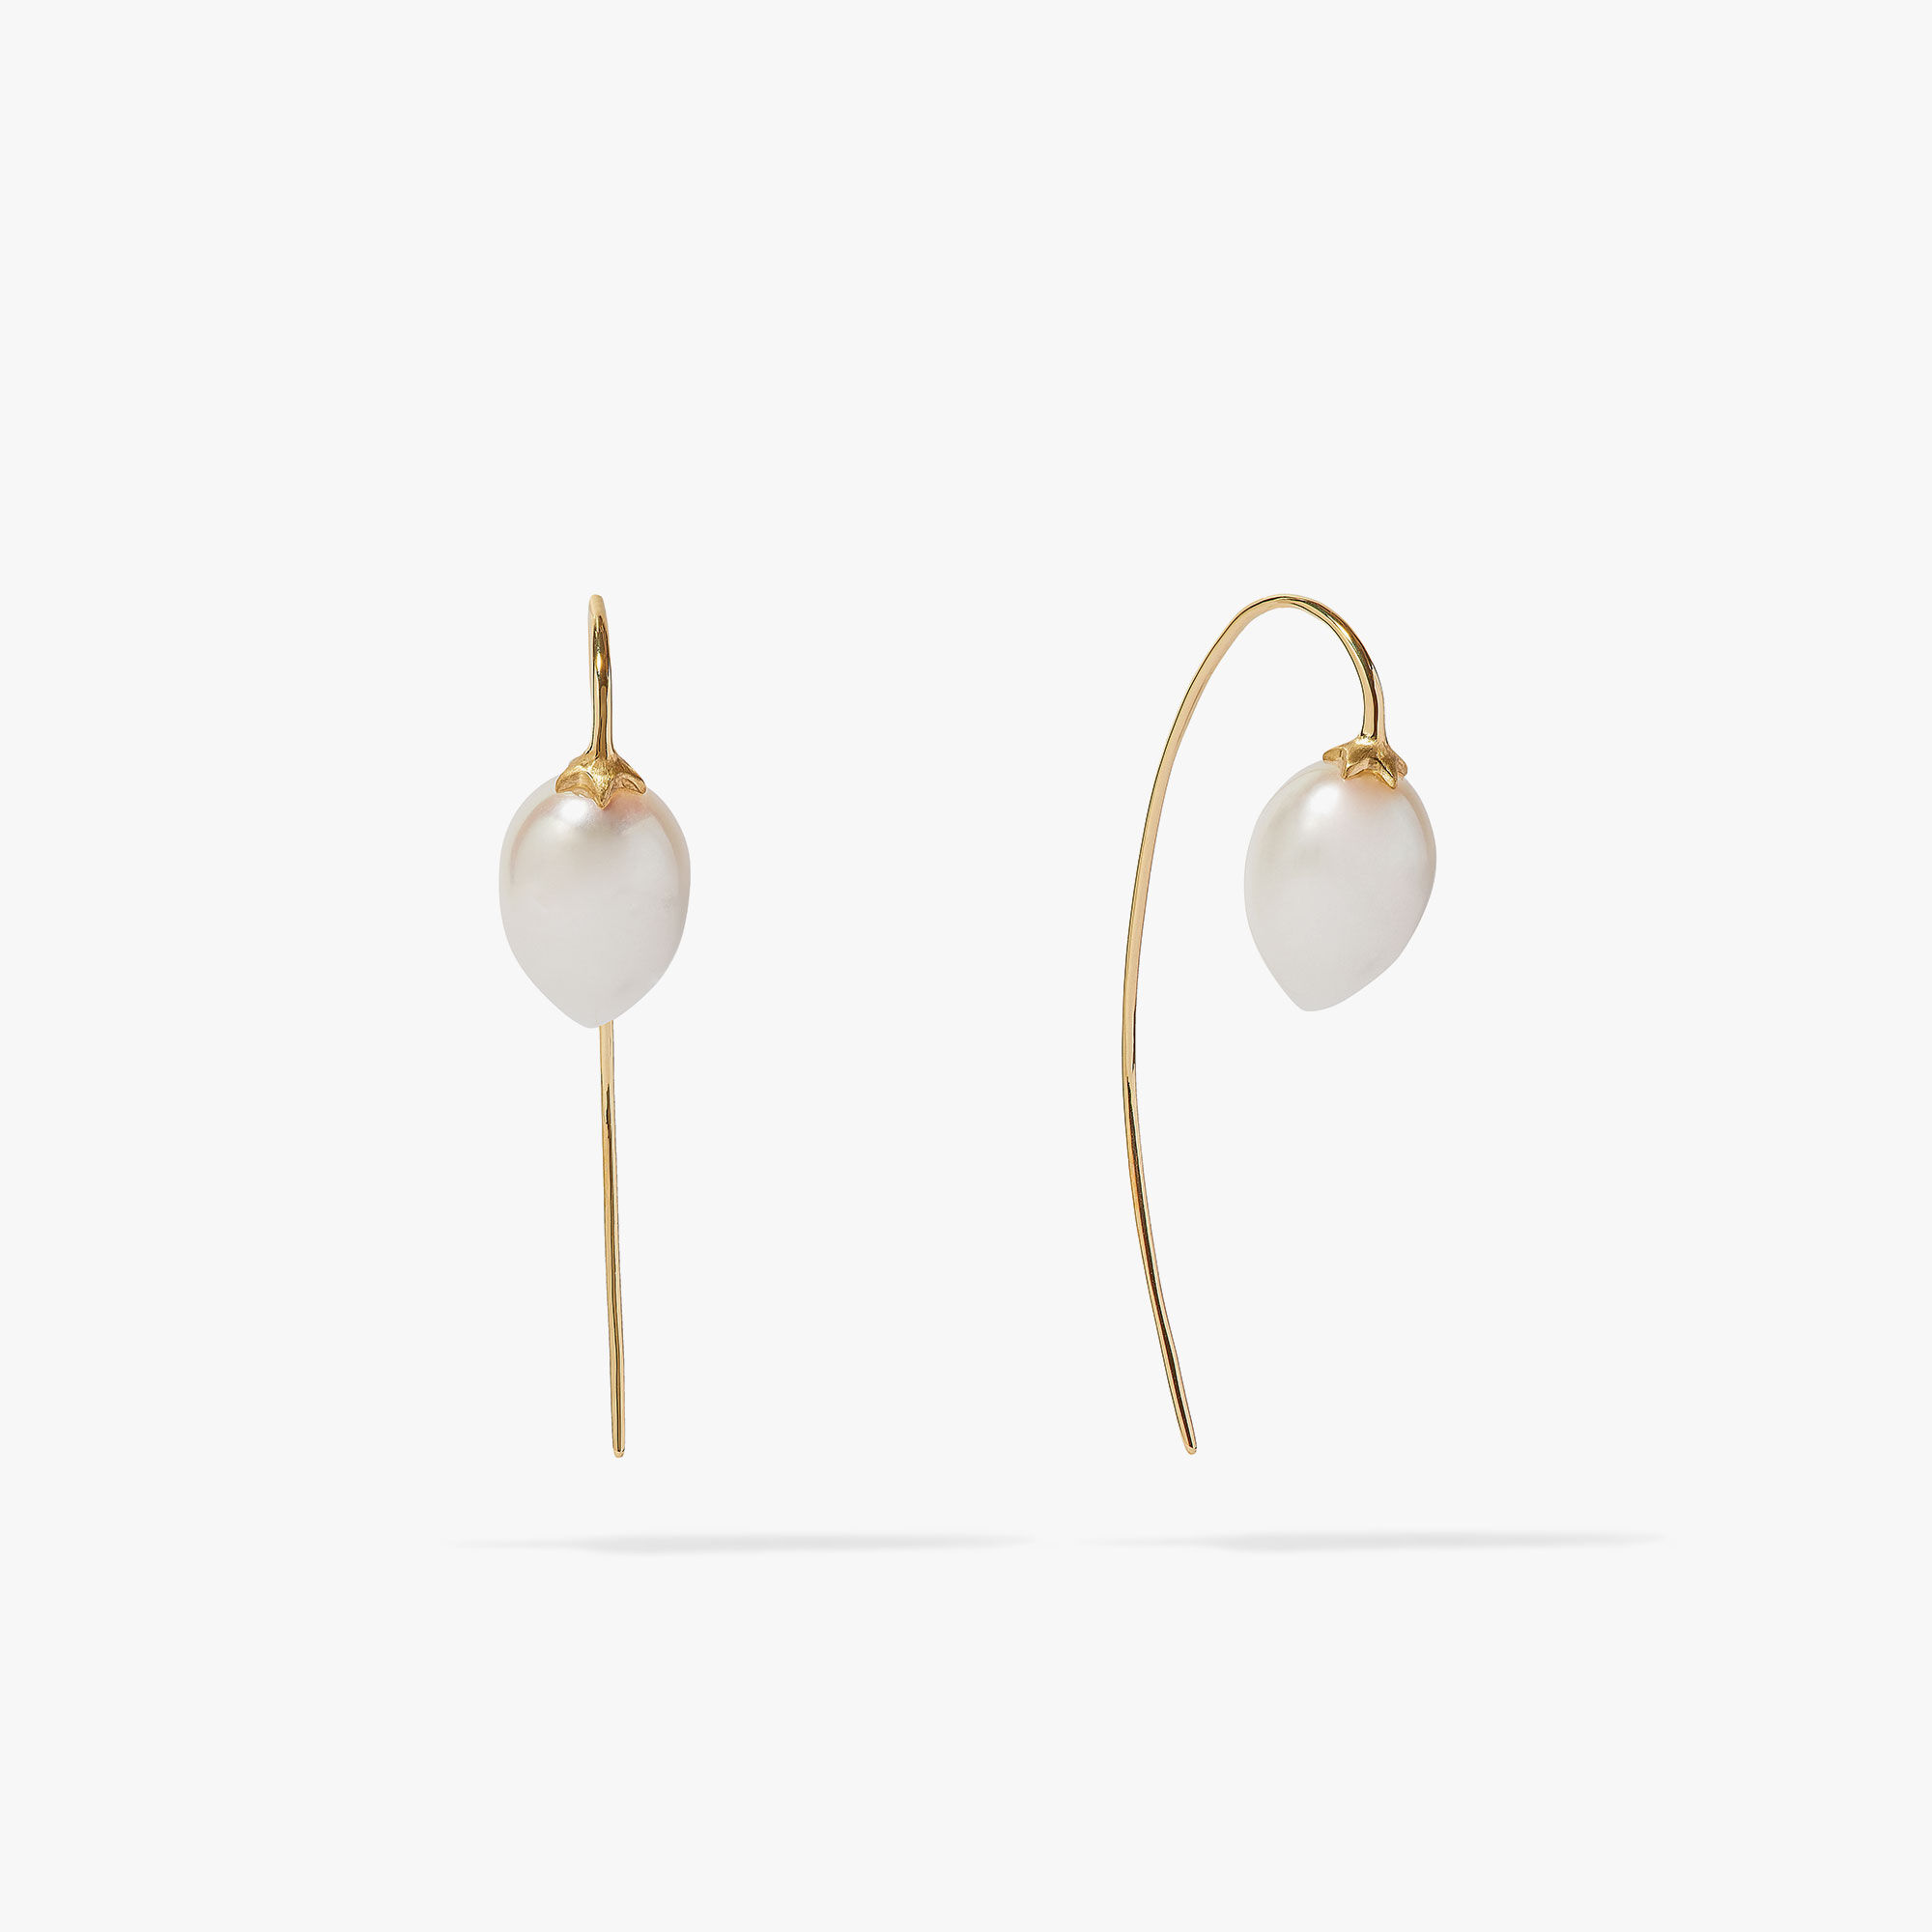 French hook earrings Rimini Due  18k gold plated with white zirconia  Sif  Jakobs Jewellery